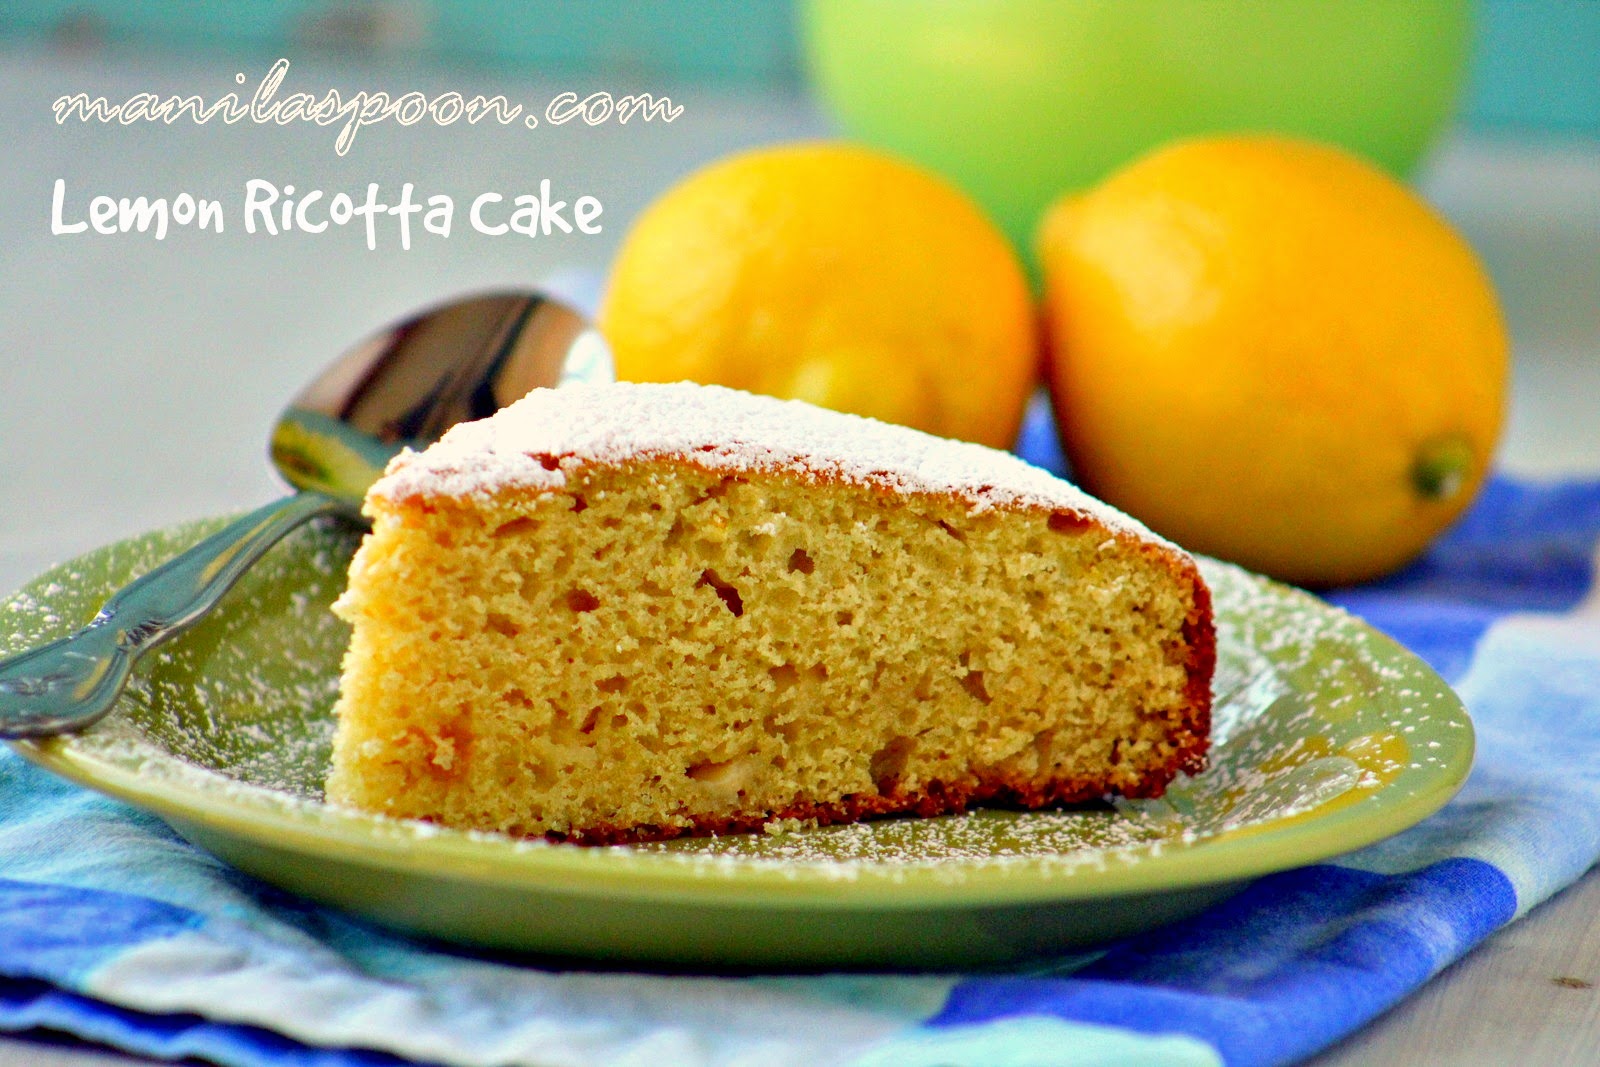 Delightfully light and delicious, this Lemon Ricotta Cake is  sweet-lemony and perfect for tea time! #lemon #ricotta #cake #italiancheesecake